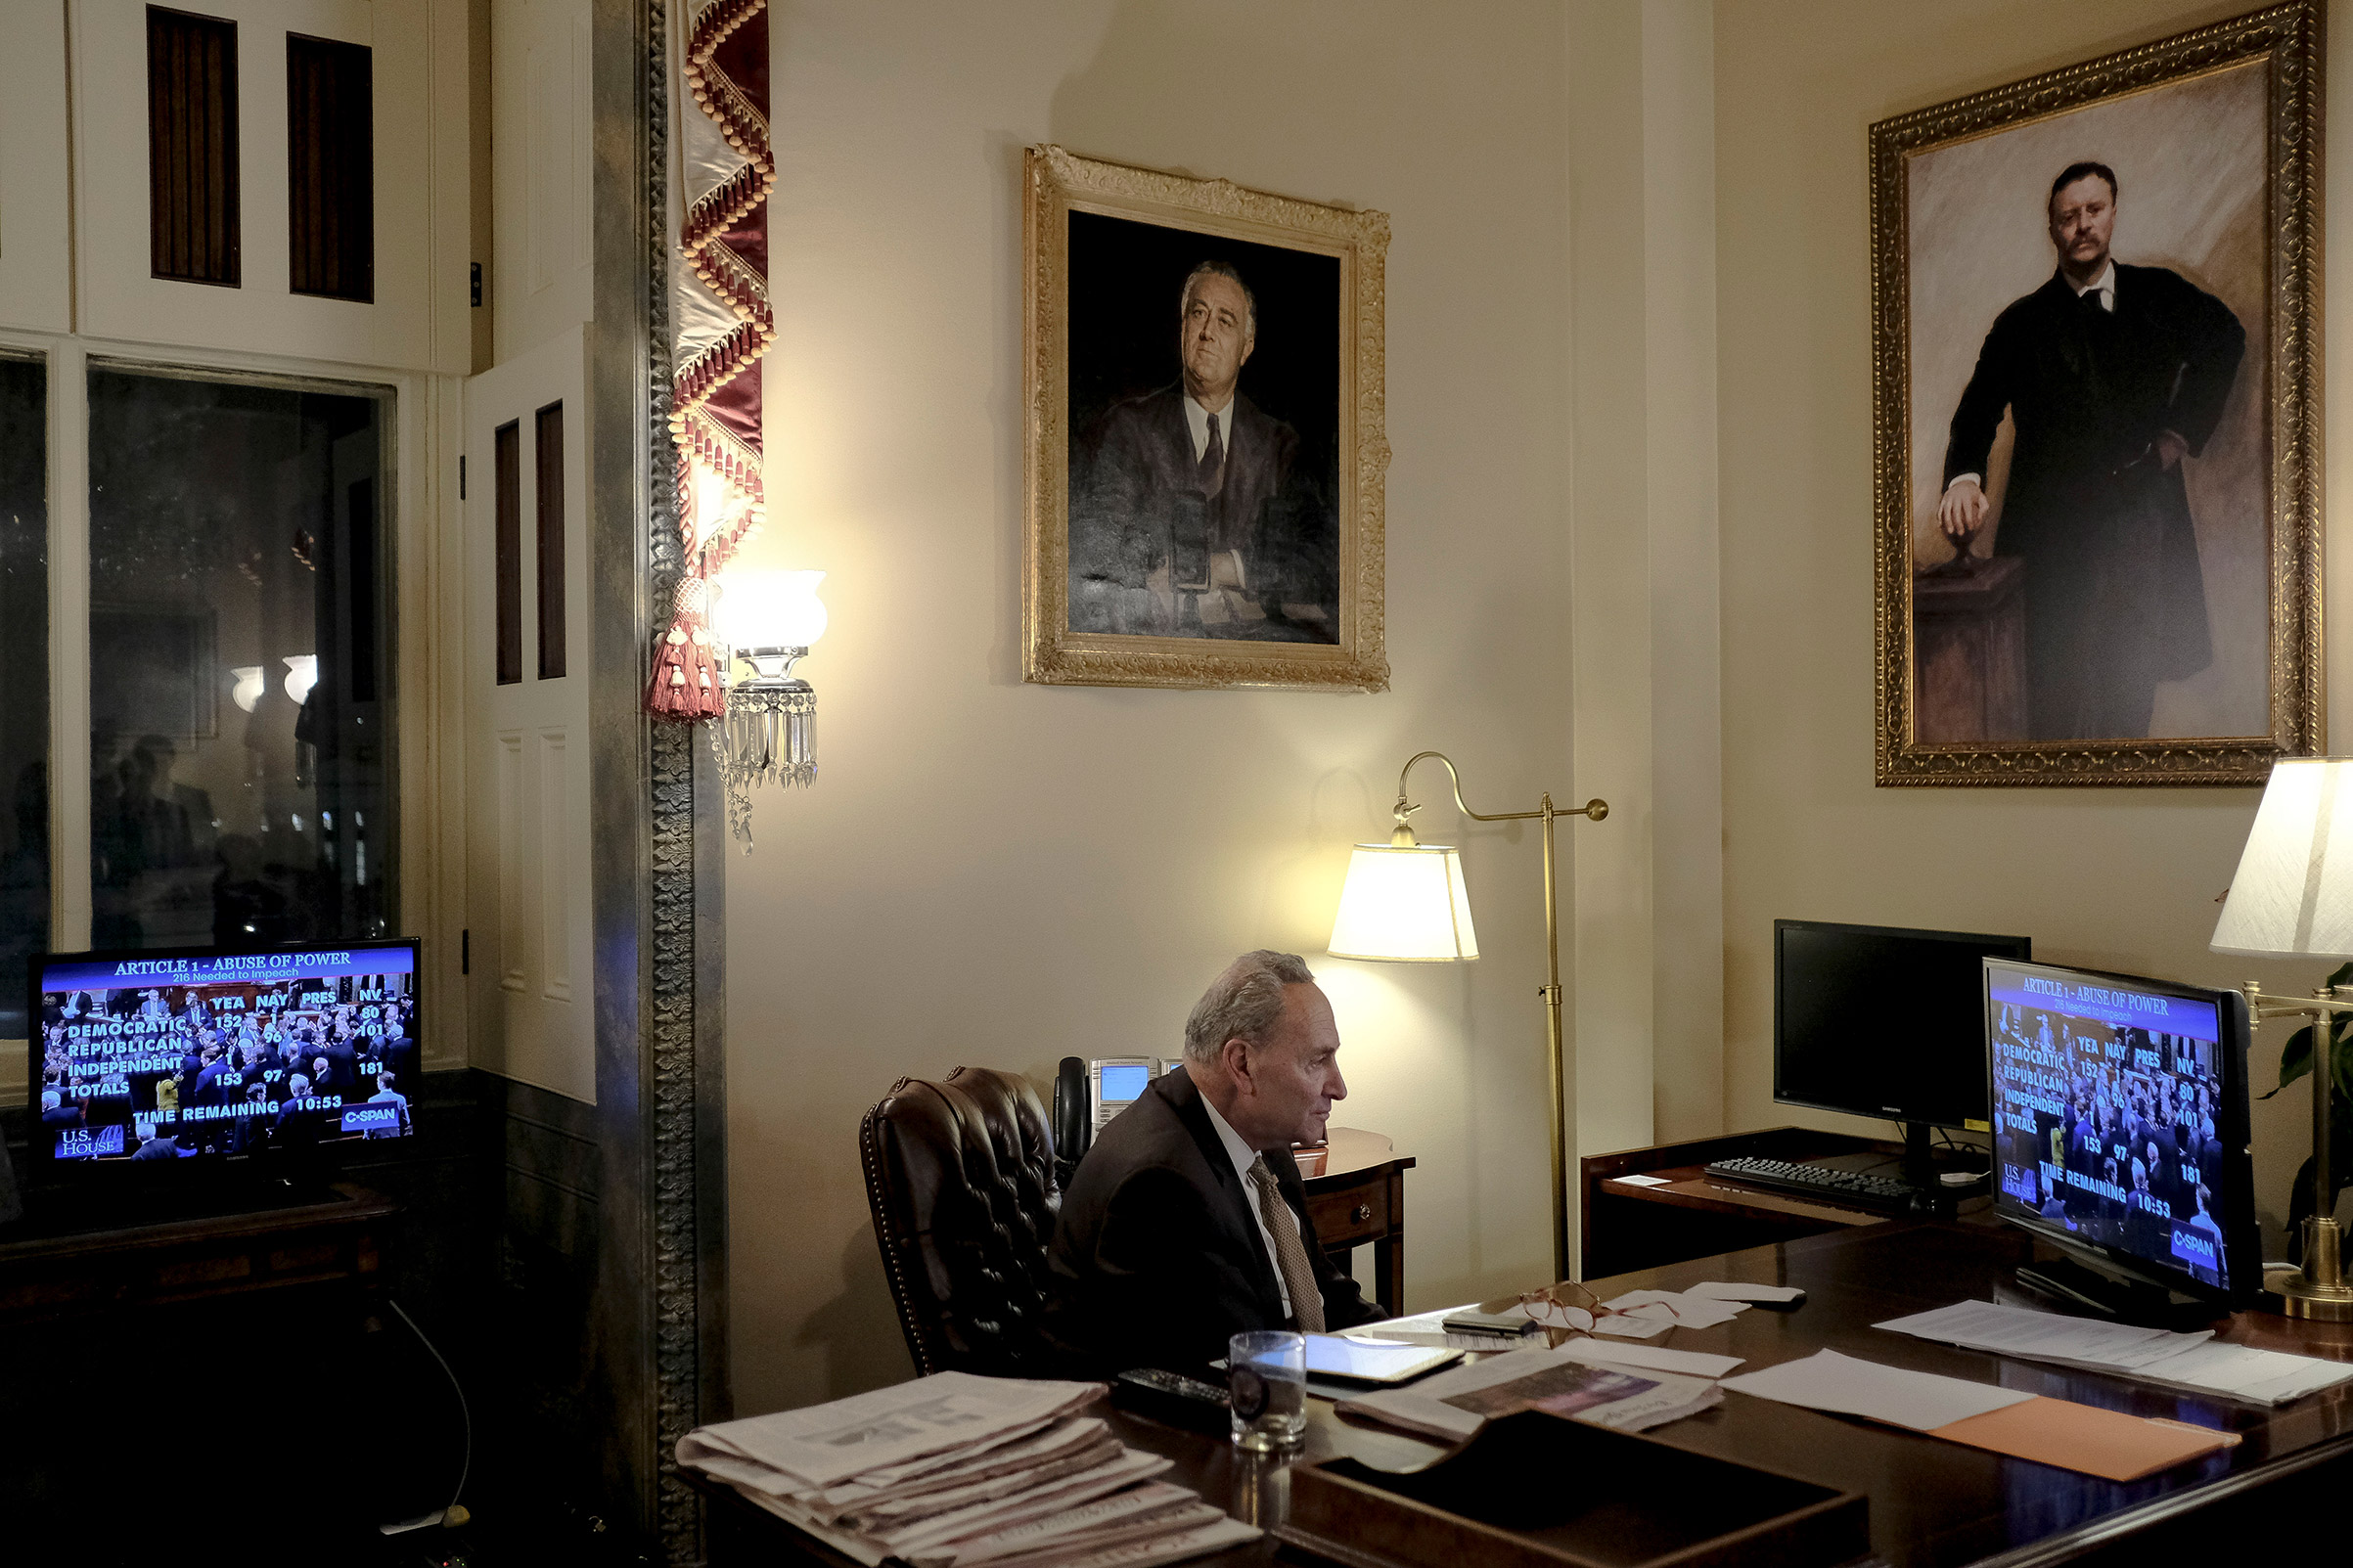 Senate Minority Leader Sen. Chuck Schumer of N.Y., watches the House vote on articles of impeachment in his office at the Capitol in Washington, D.C. on Dec. 18, 2019. (Gabriella Demczuk for TIME)